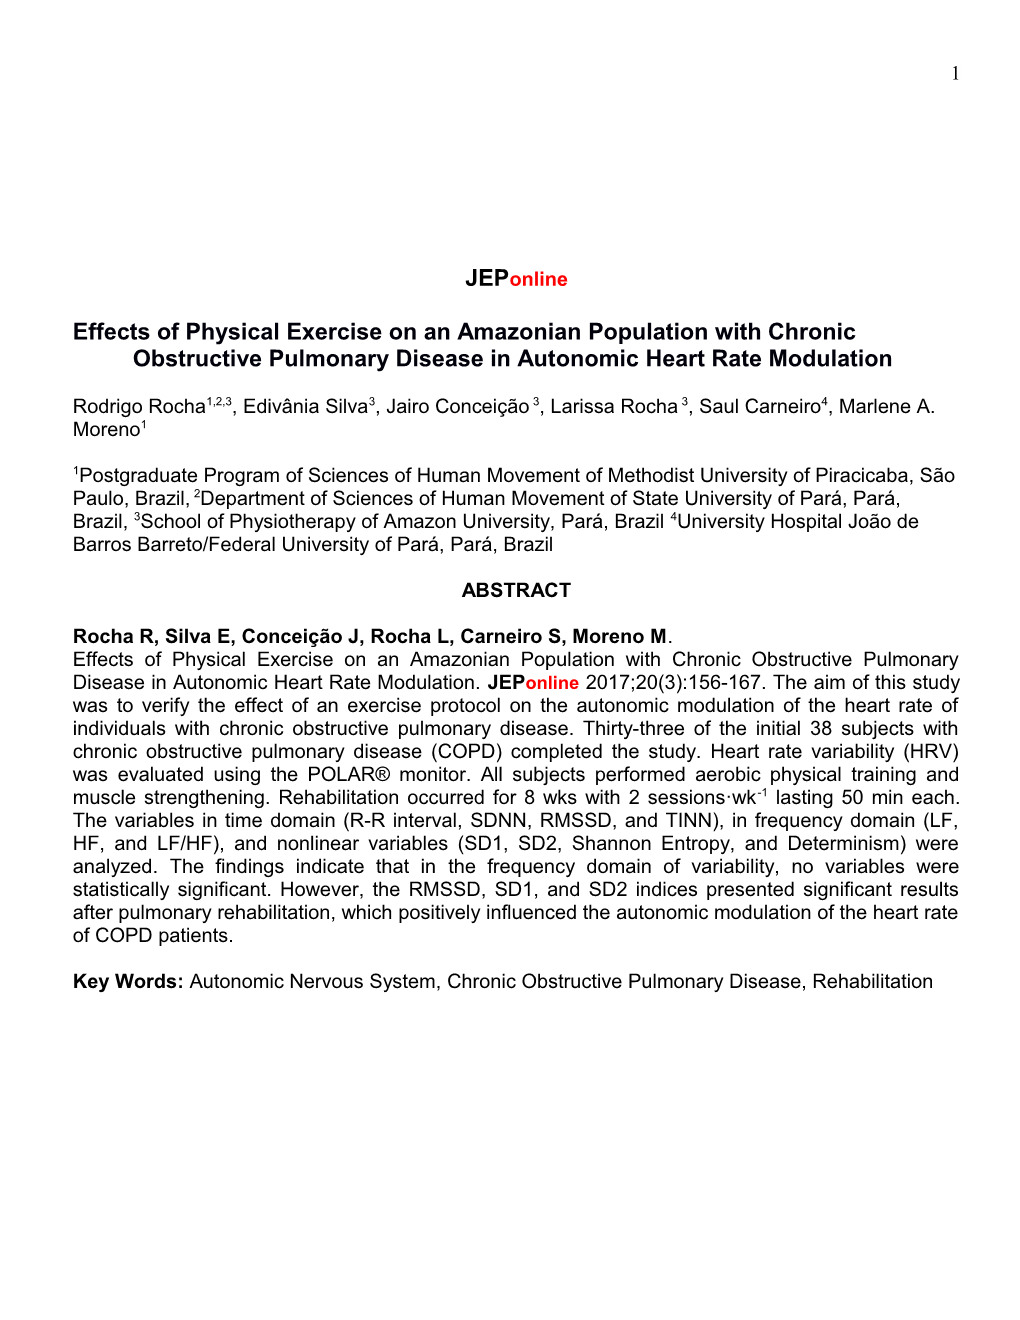 Effects of Physical Exercise on an Amazonian Population with Chronic Obstructive Pulmonary